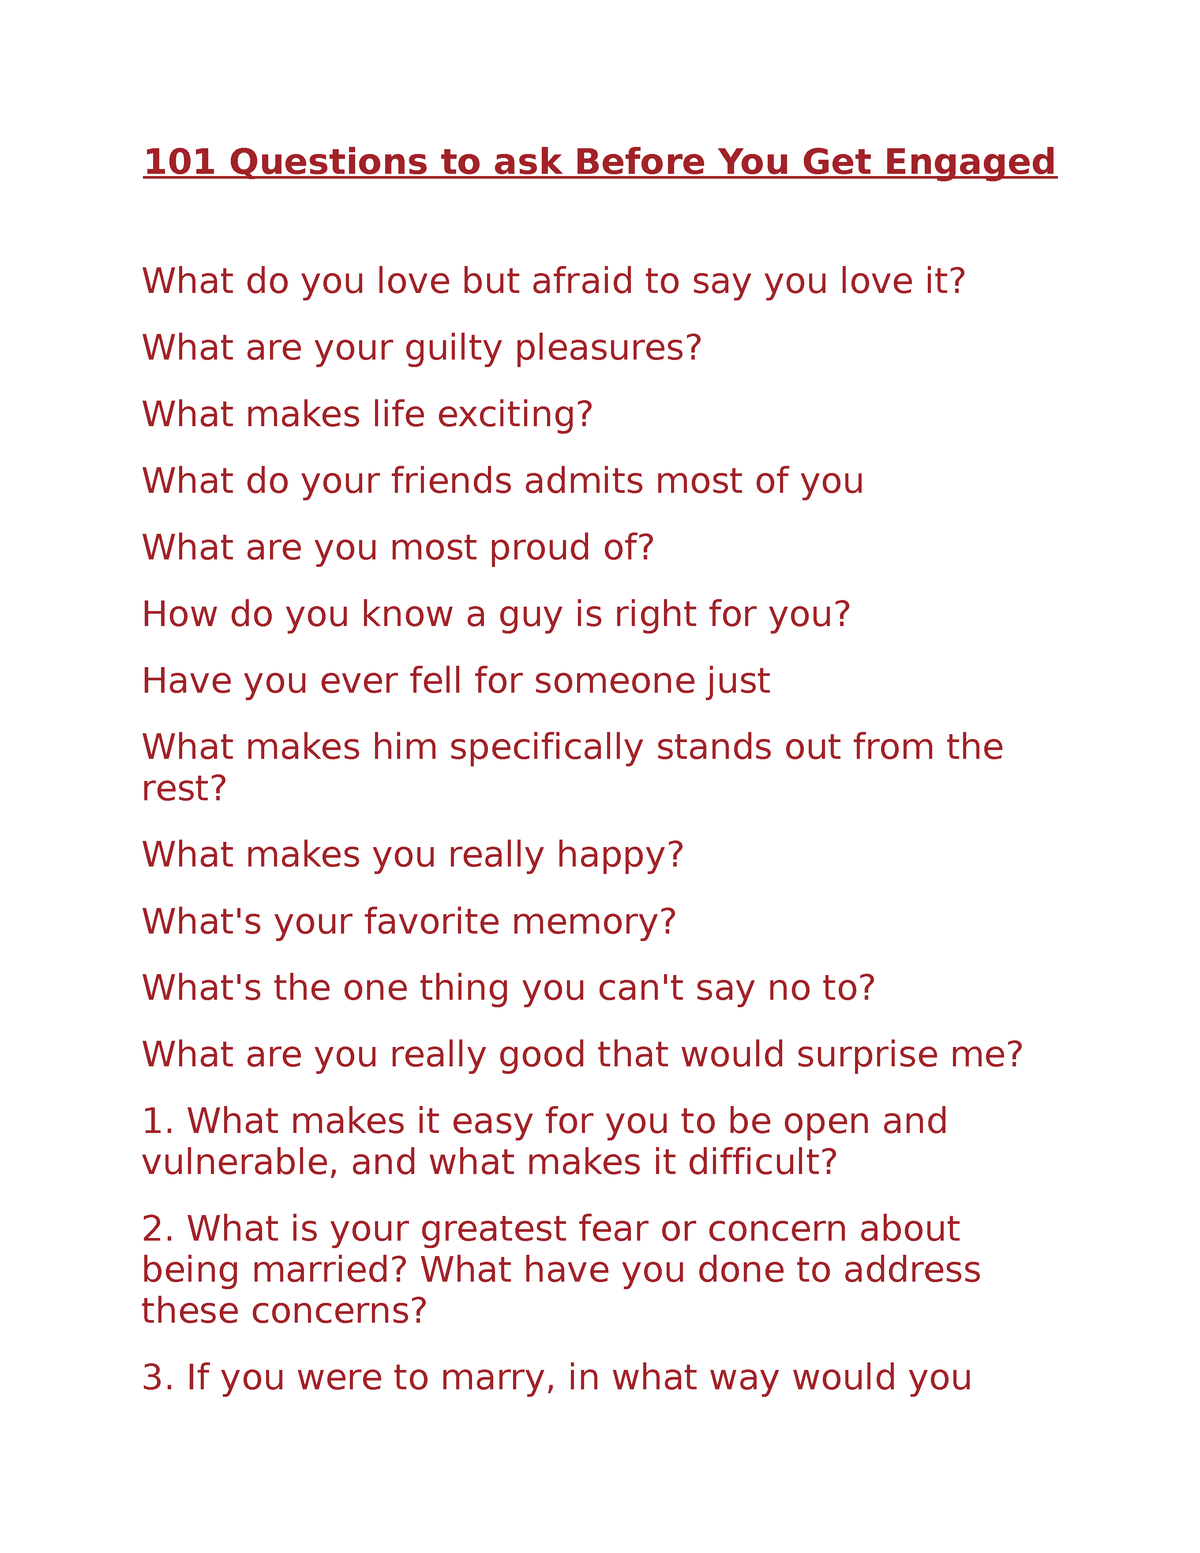 183633489 101 Questions Before getting Engaged - 101 Questions to ask ...